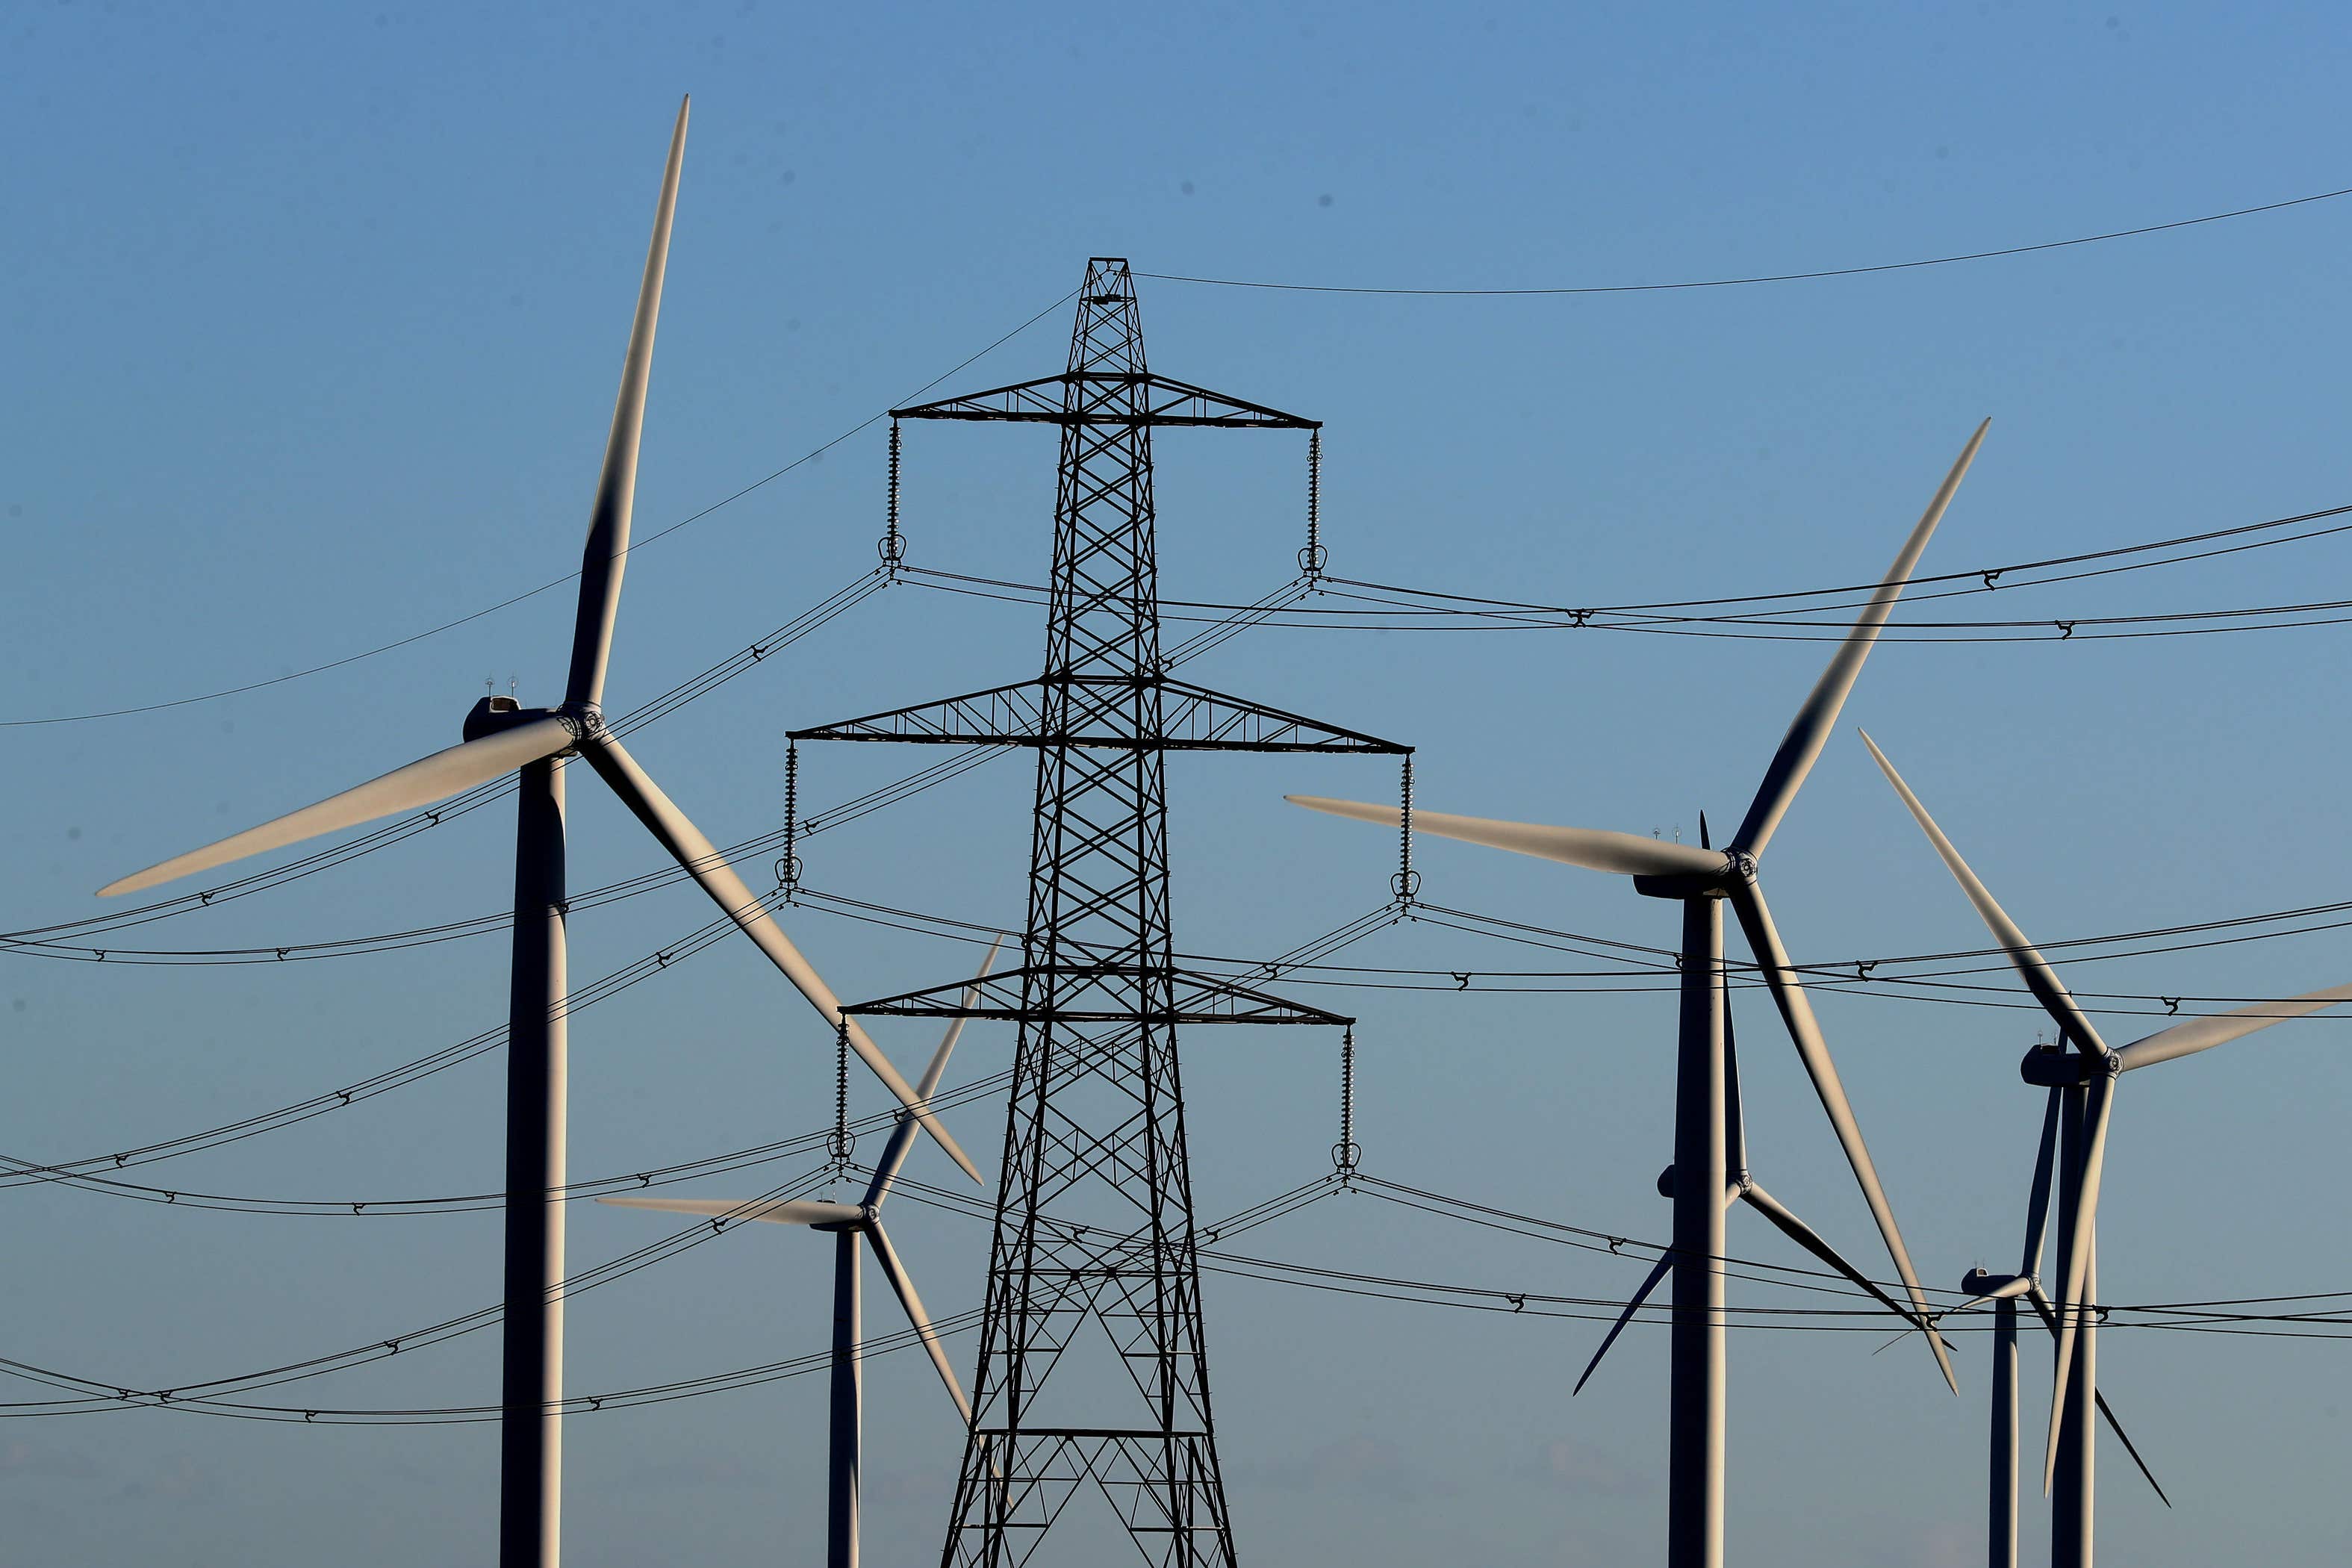 National Grid’s ESO has laid out plans for a decarbonised electrical system in the UK